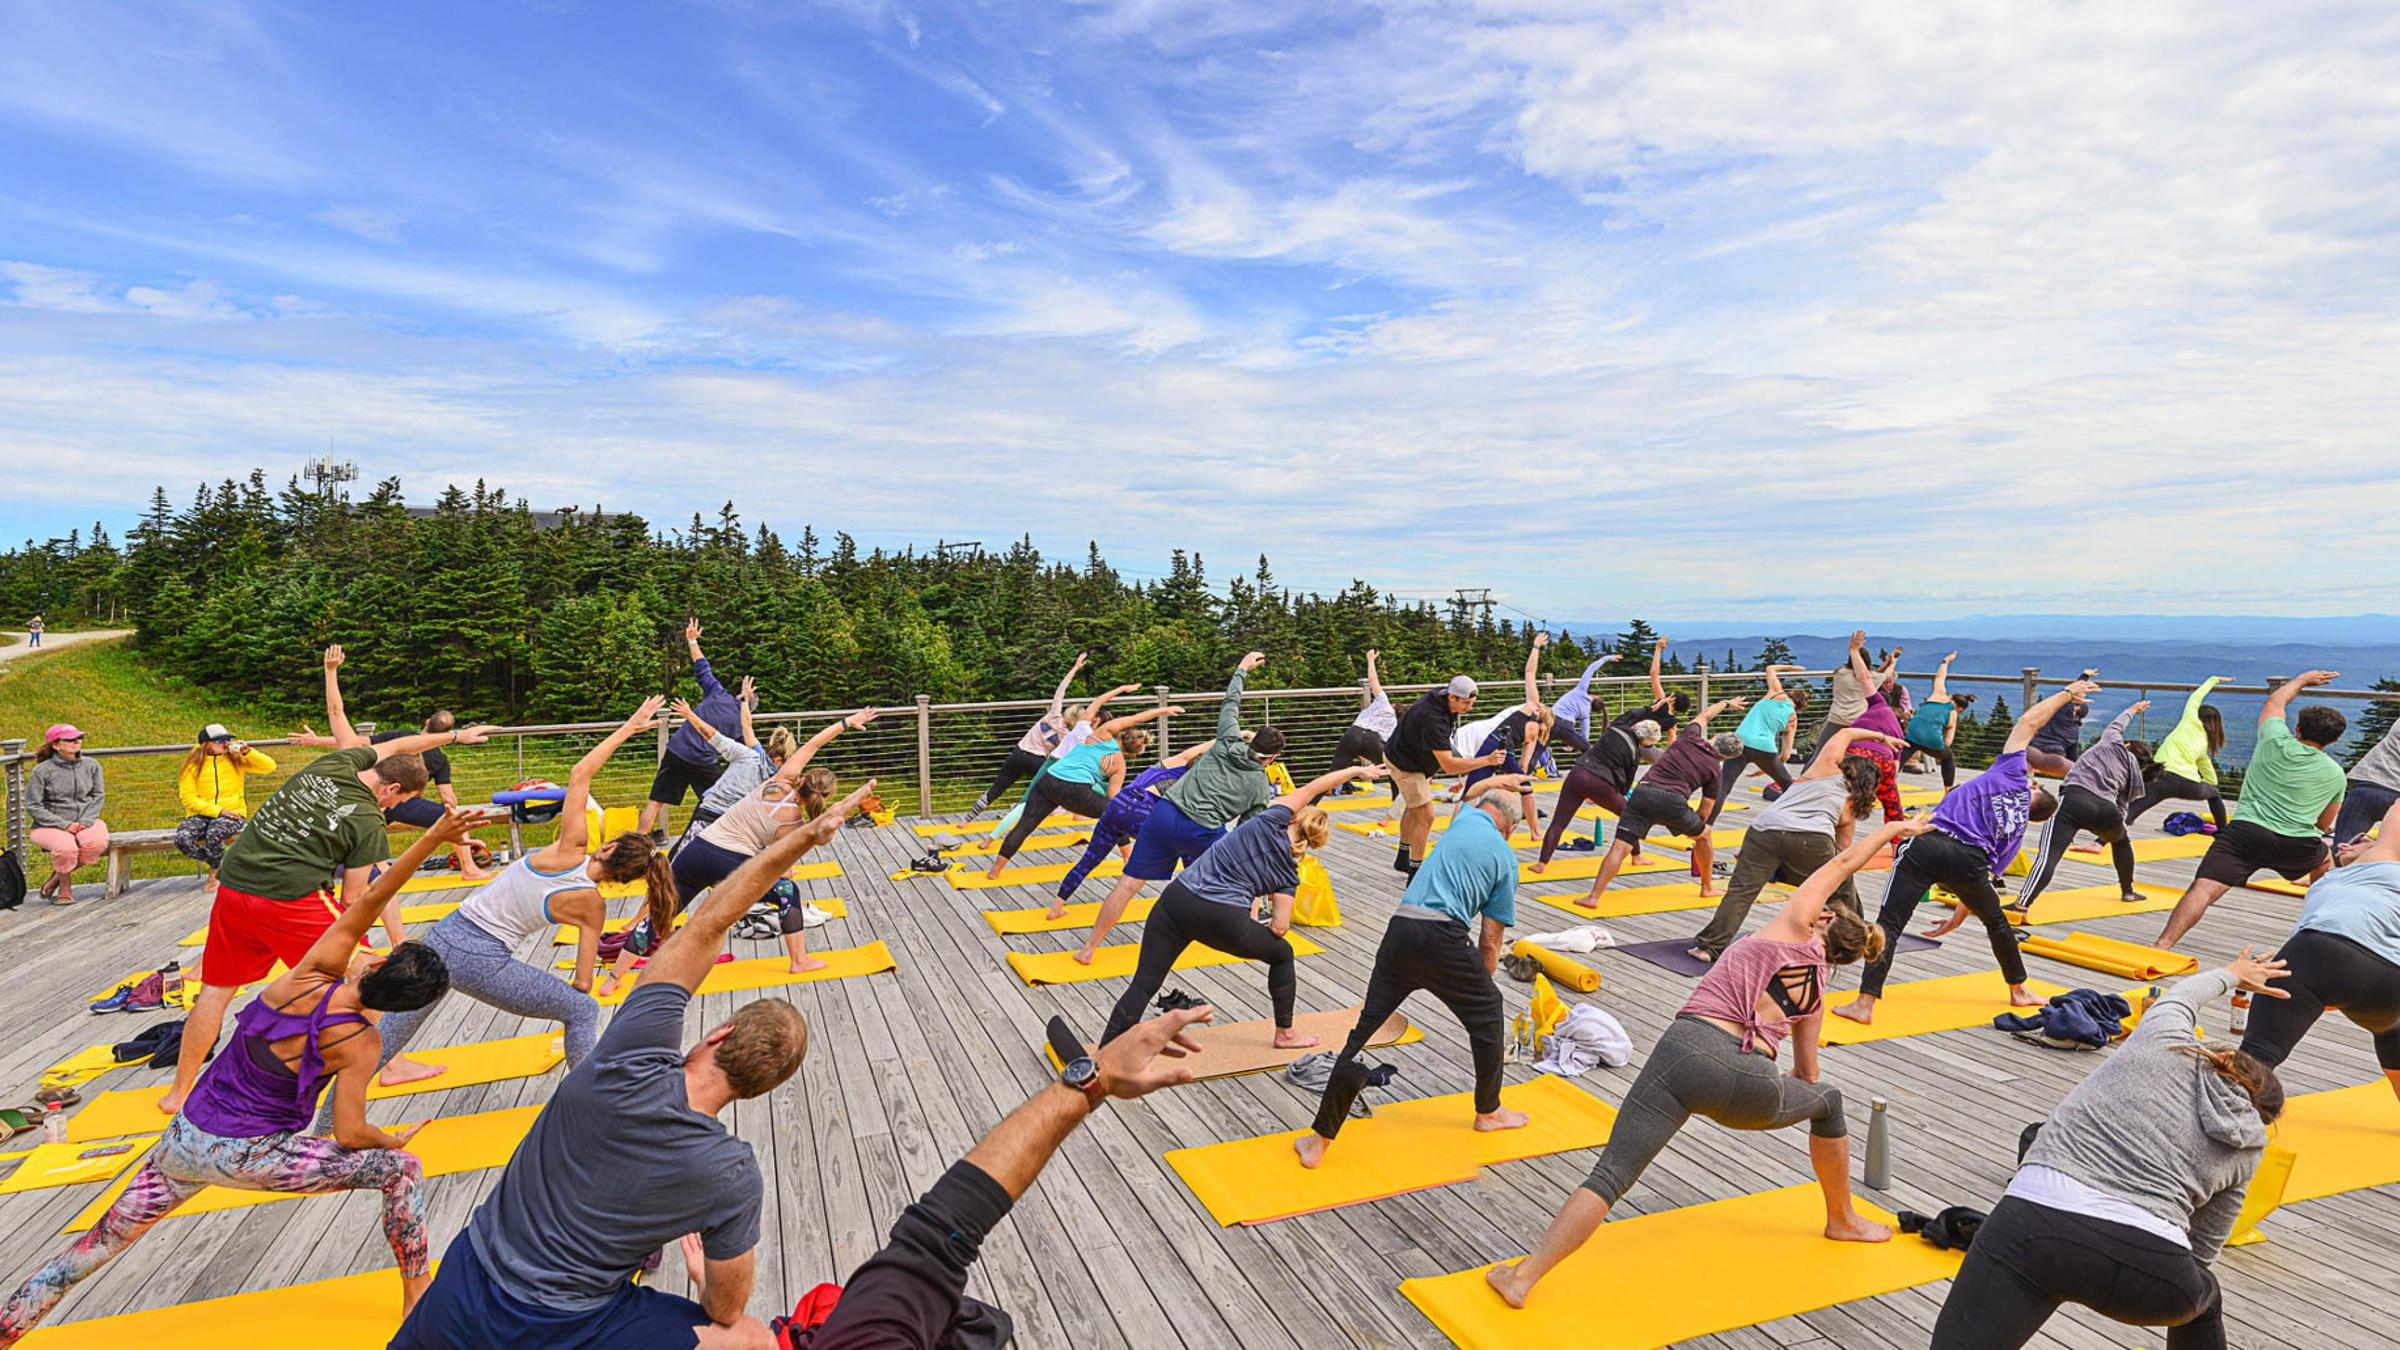 https://www.stratton.com/-/media/widen/stratton/stock-photography/summer/2019/activities/yoga/2019-09-01-hs-st-lole-outloud-2019-4-jpg.jpg?rev=fead15a7ca924b93938f42a01f68f32f?h=1350&w=2400&hash=FAF7DCC3ED64F5975651DF5453DCDB3D